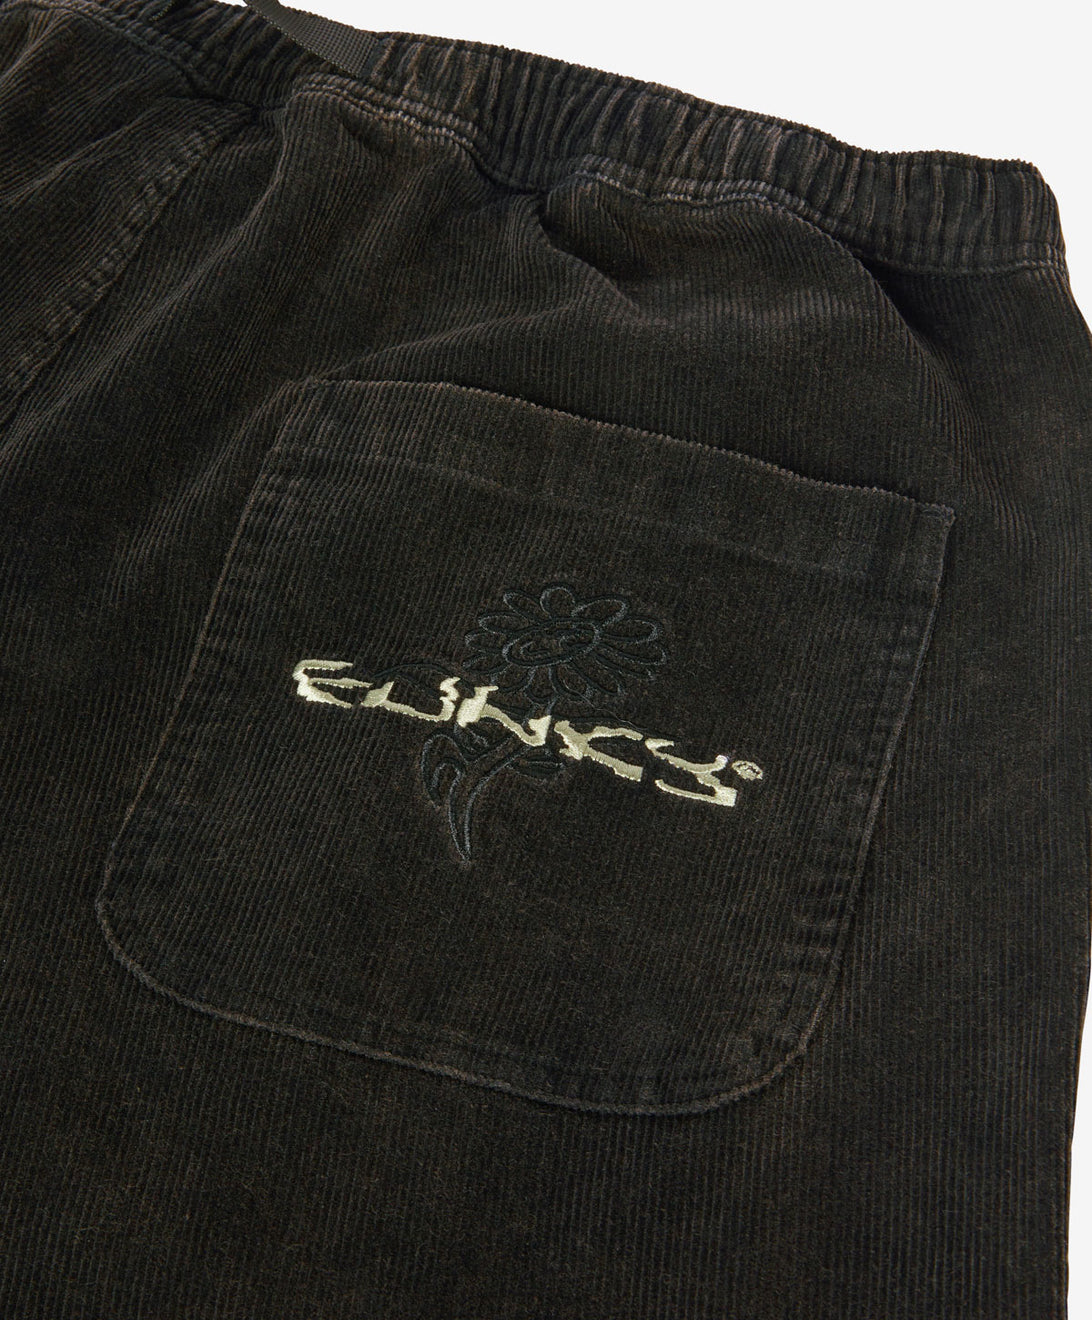 ROUND CORDUROY TROUSERS WASHED BLACK